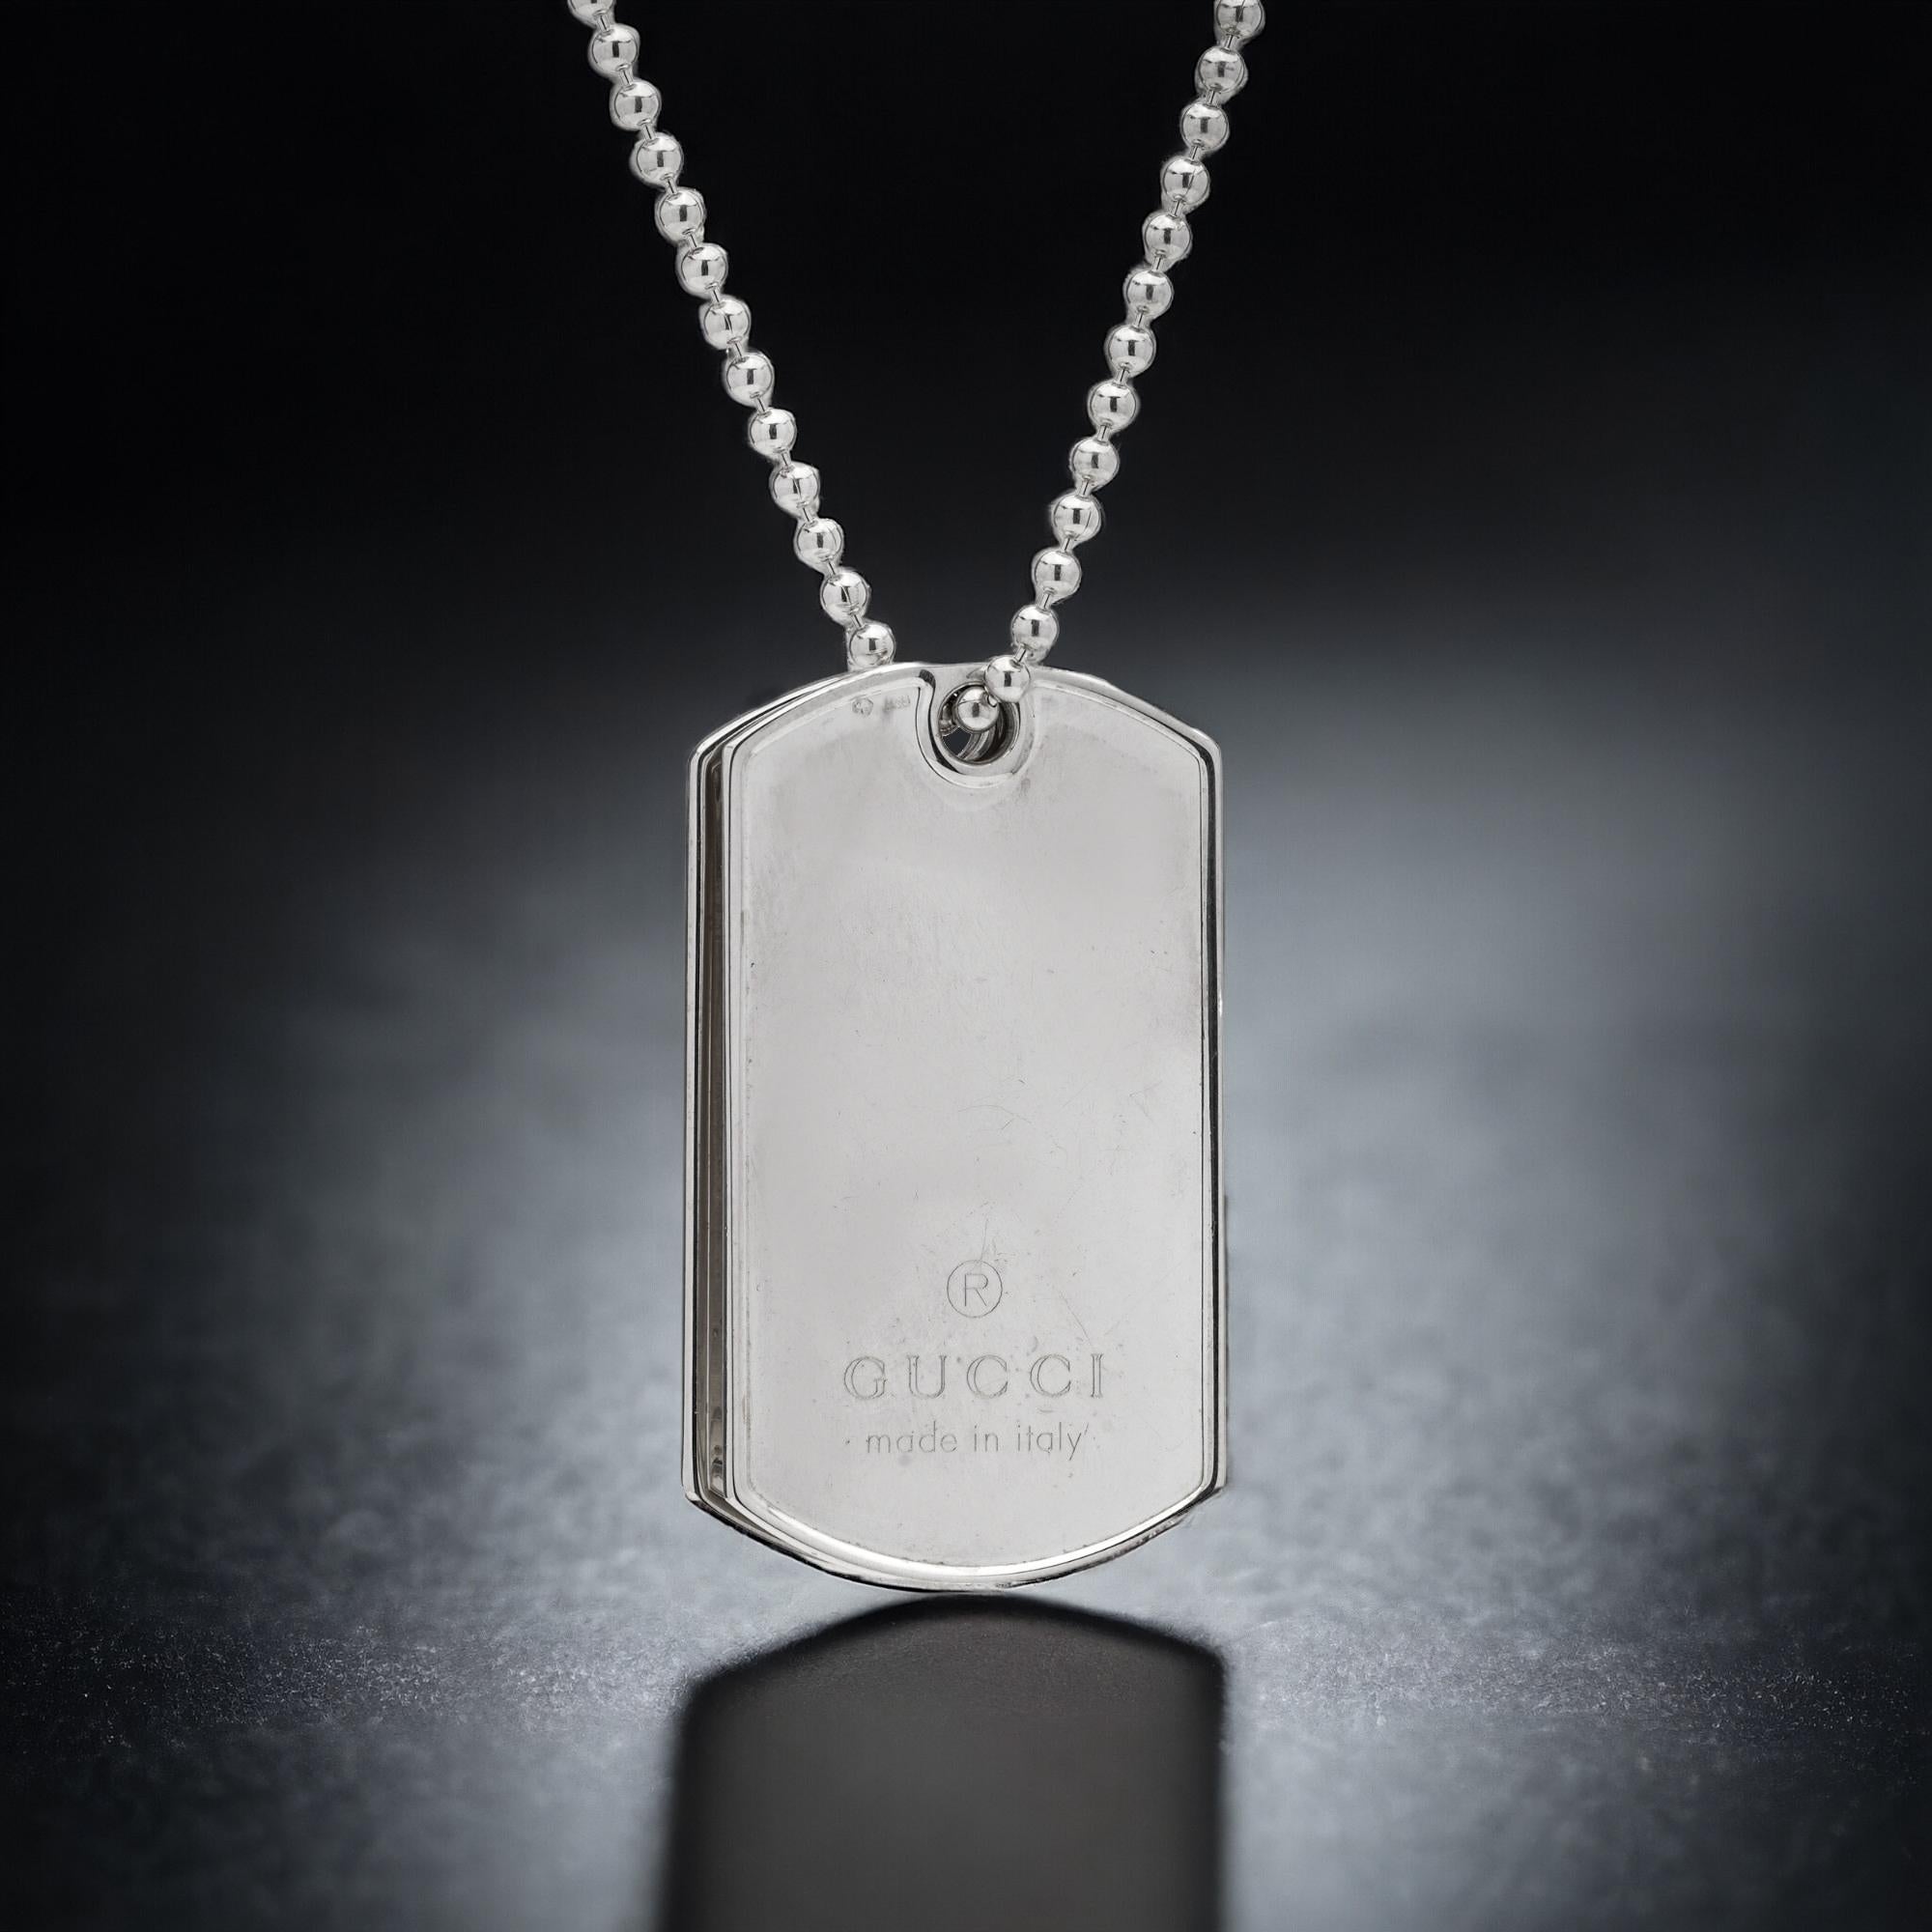 Gucci Sterling 925 Silver Double Dog Tag Ball Chain Unisex Pendant Necklace. 
Designer / Maker: Gucci
Made in Italy, After 2000
Hallmarked with Gucci logo, 925 silver, Italian hallmarks. 

Dimensions -
Approx. Necklace Length: 60 cm
Tag Pendant